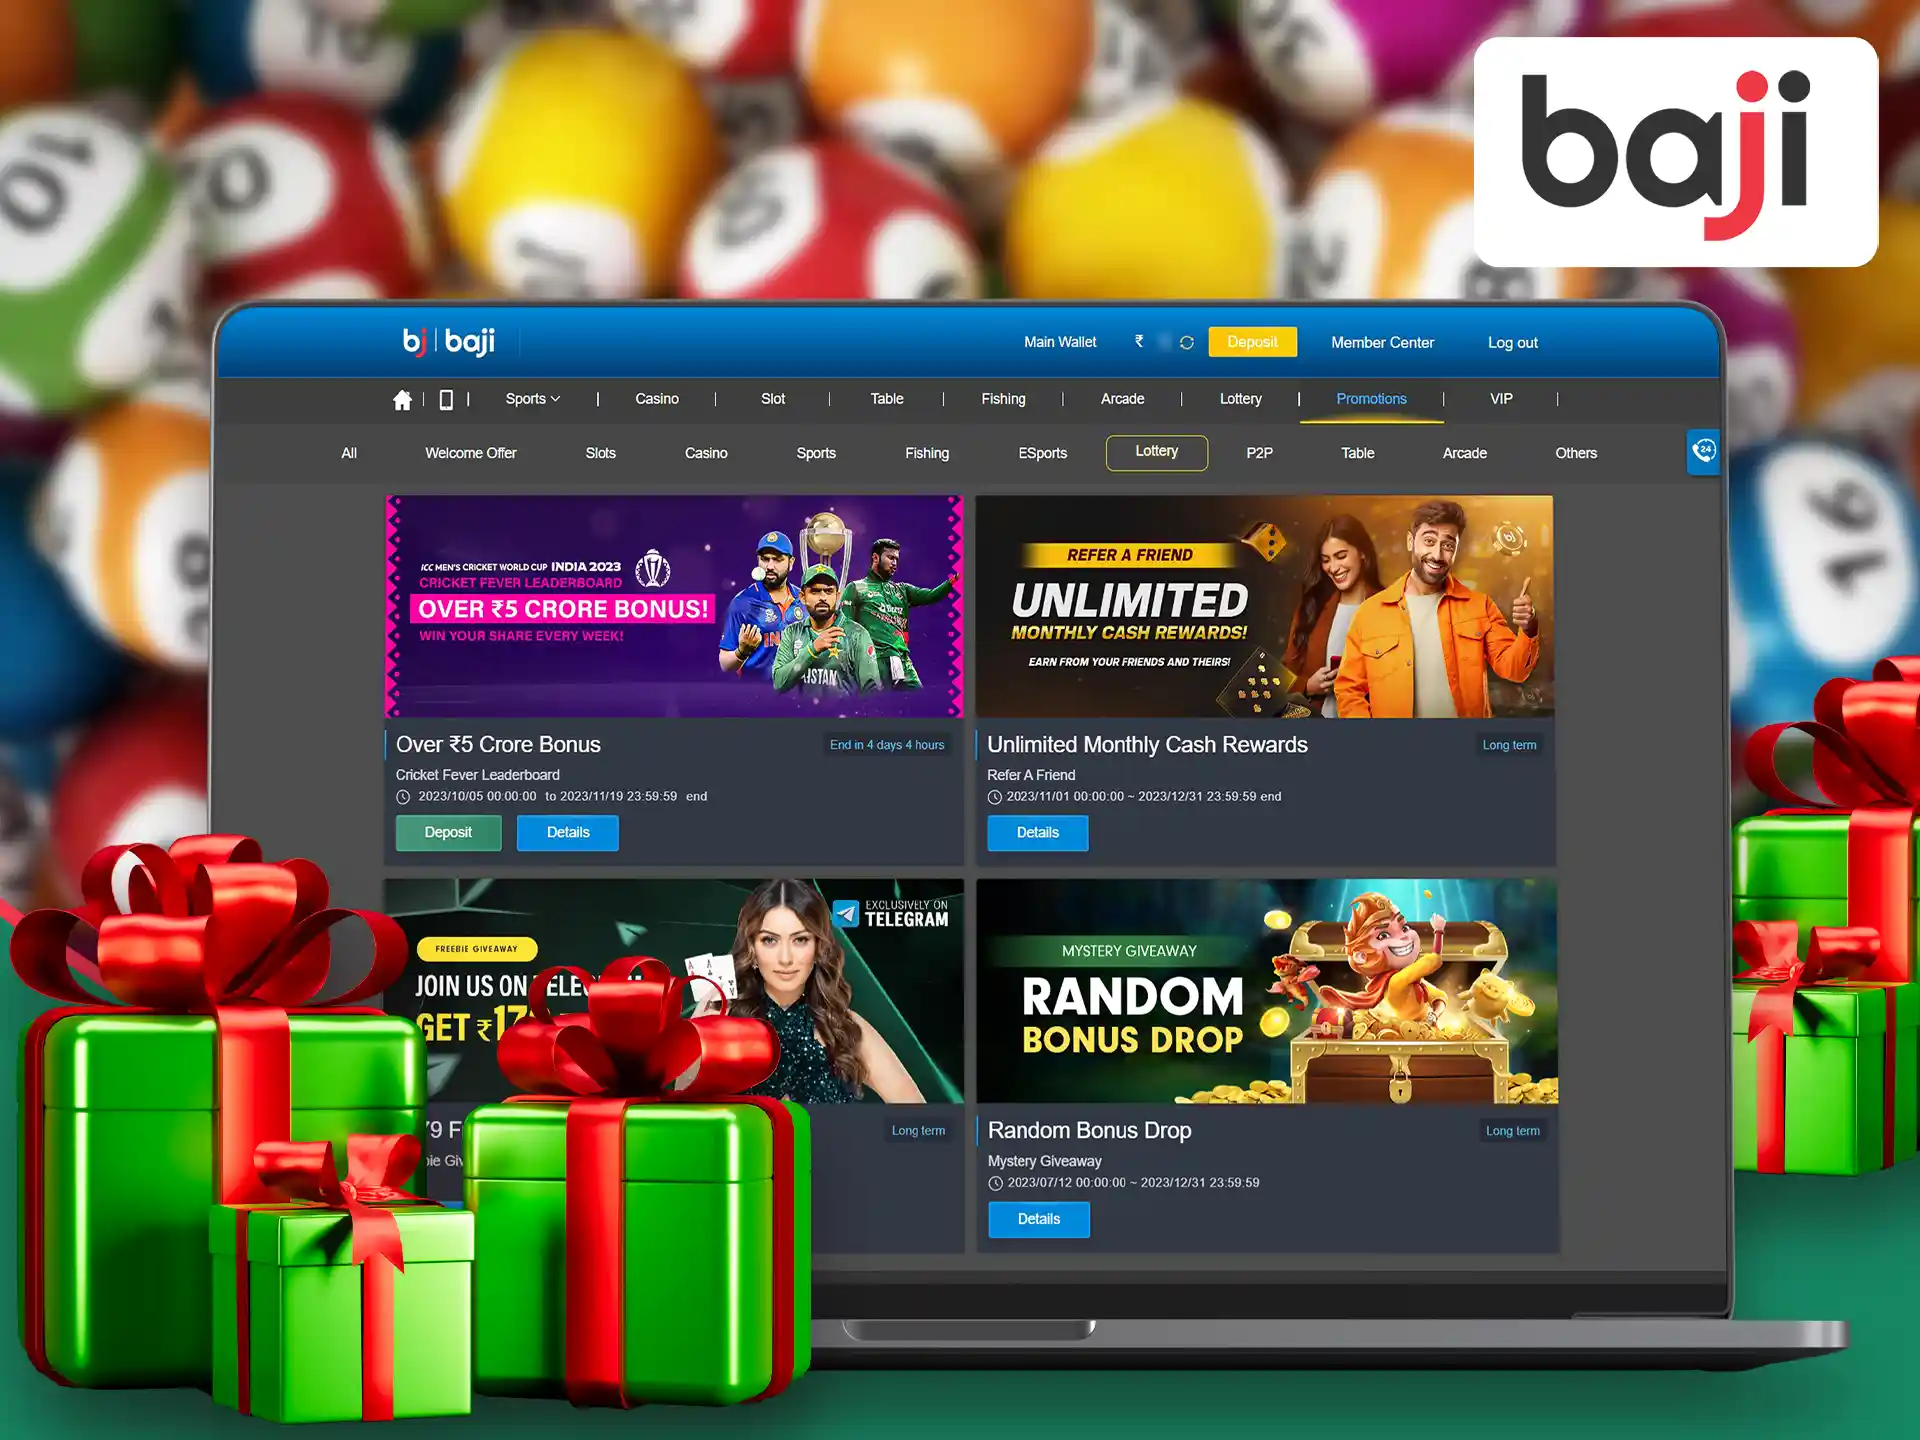 Baji Bet offers a generous bonus system for new and regular players.